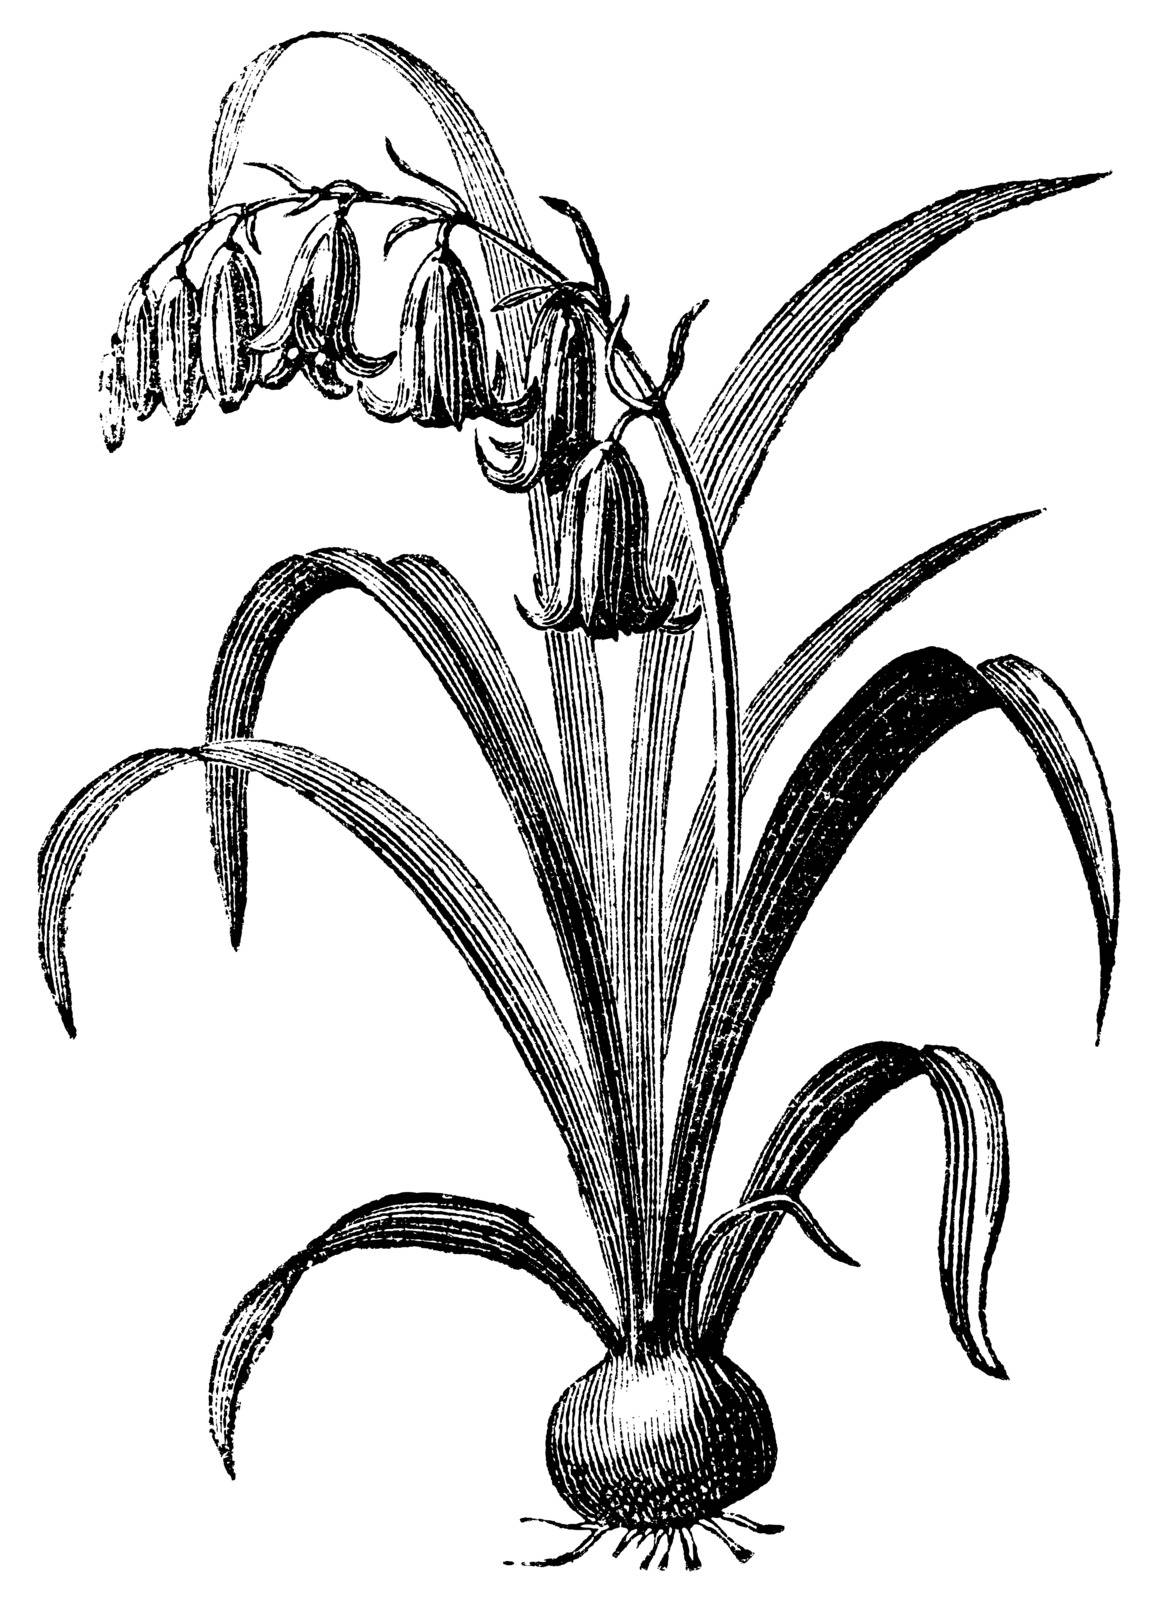 Common bluebell or Hyacinthoides non-scripta vintage engraving by Morphart